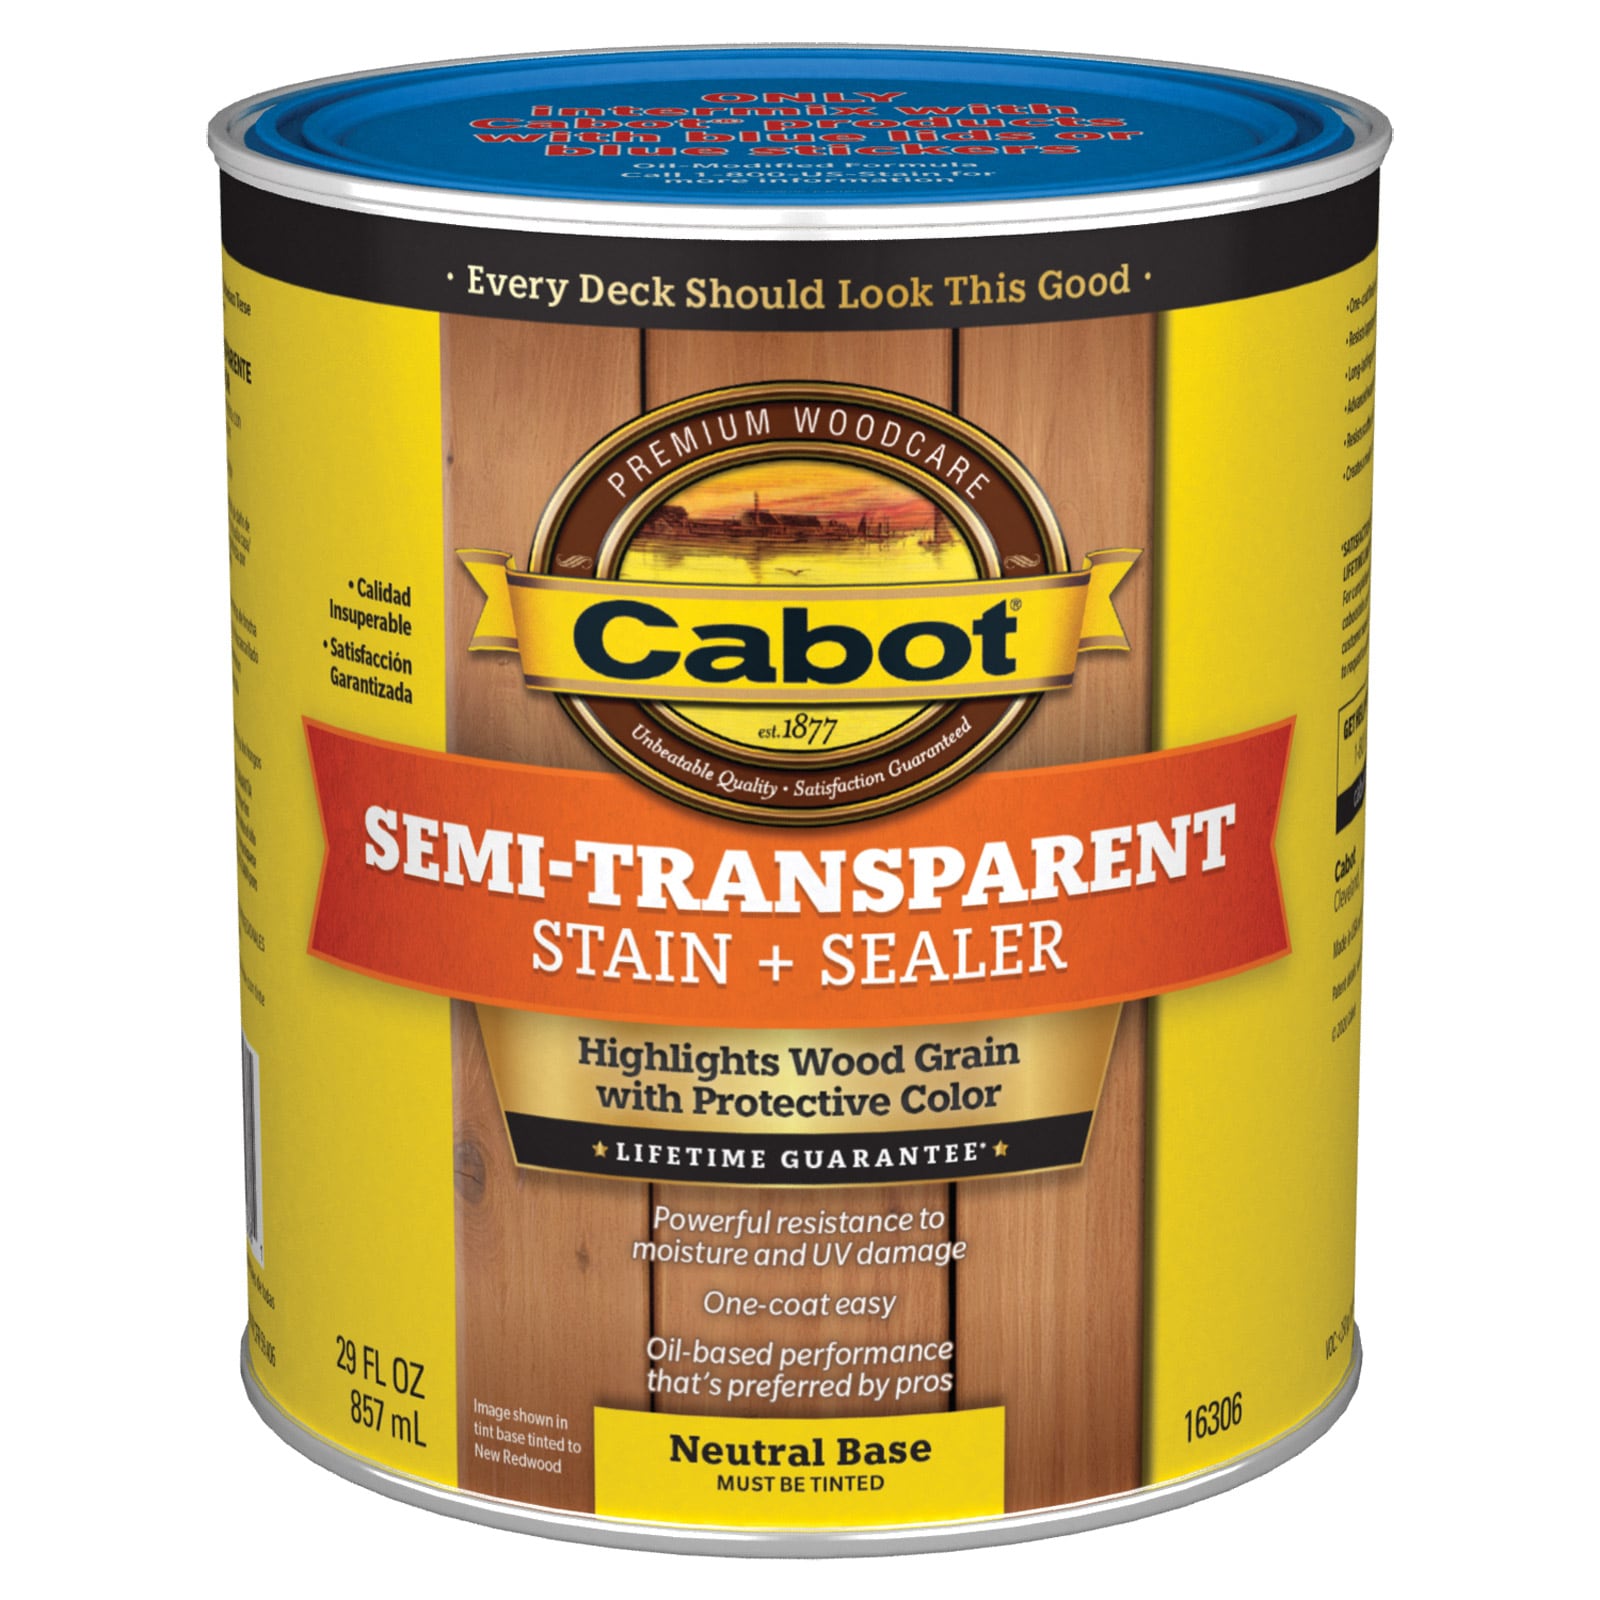 Cabot Neutral Base Semi-transparent Exterior Wood Stain and Sealer